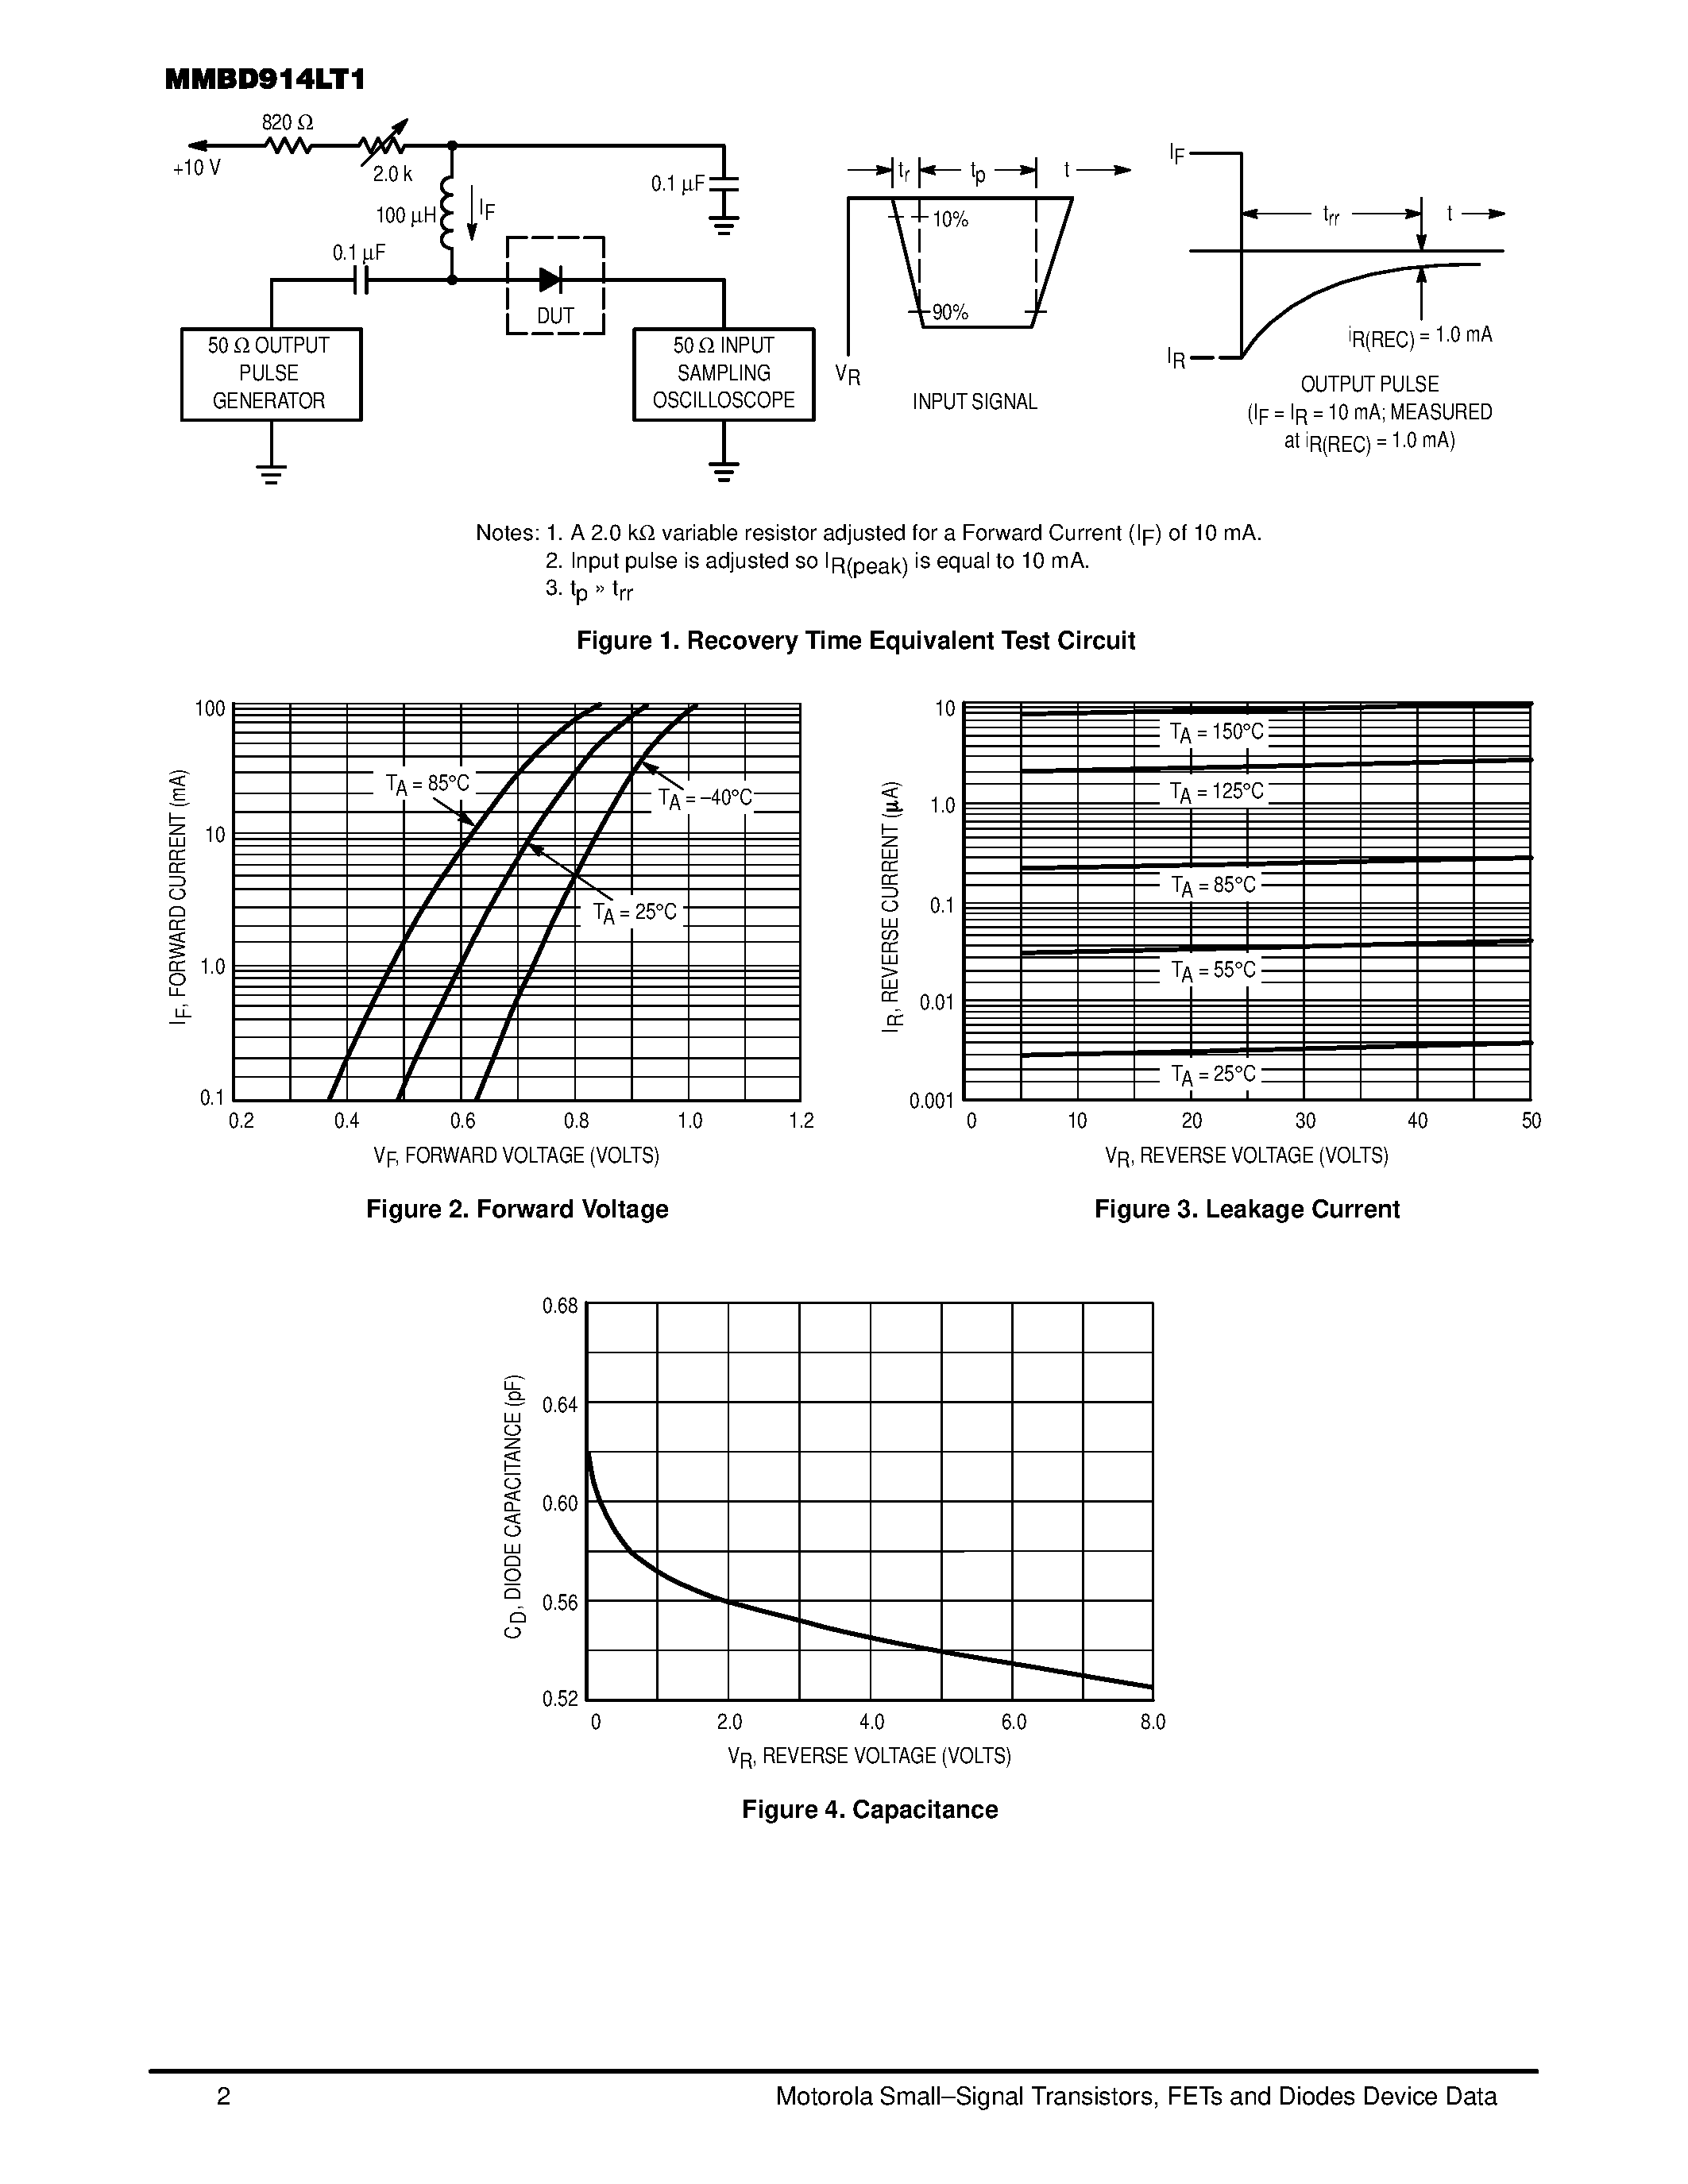 Datasheet MMBD914L - High-Speed Switching Diode page 2